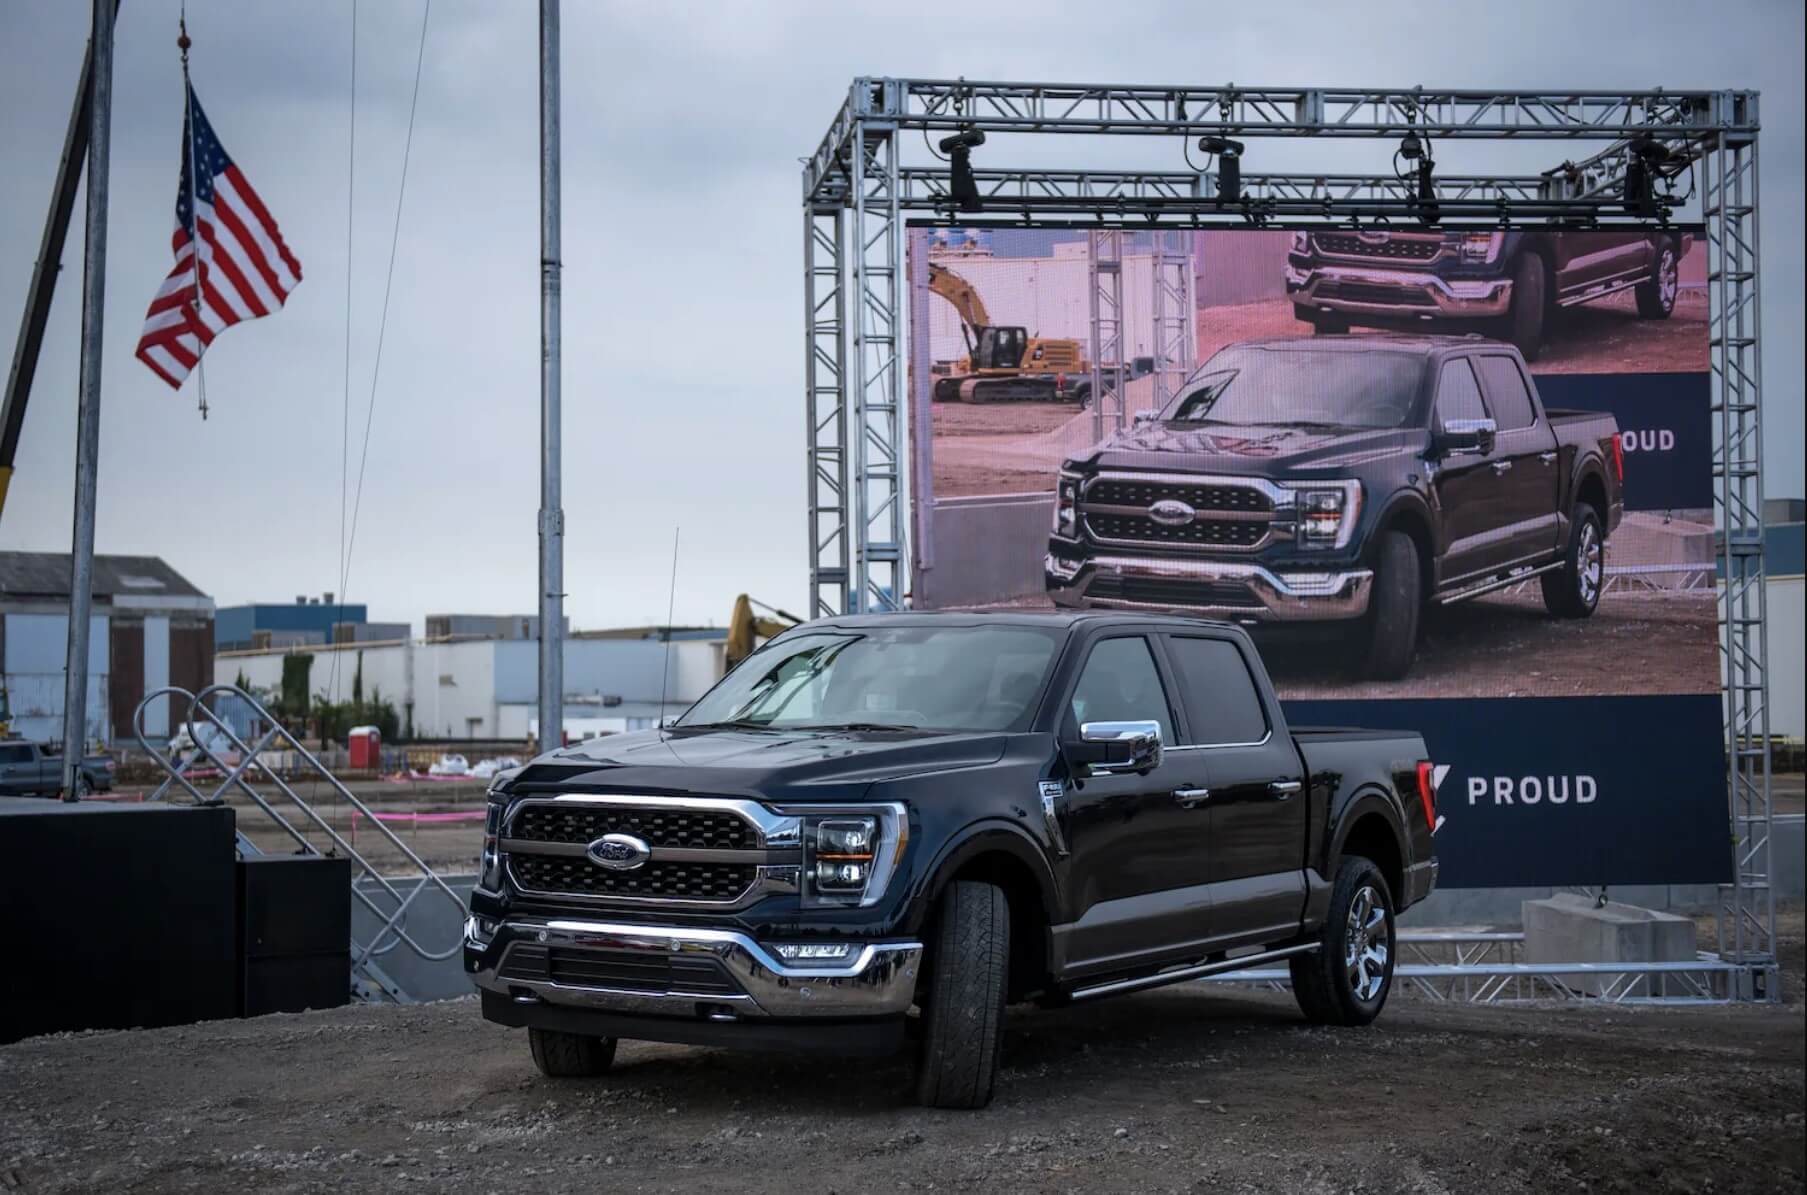 The new Ford F-150 on display